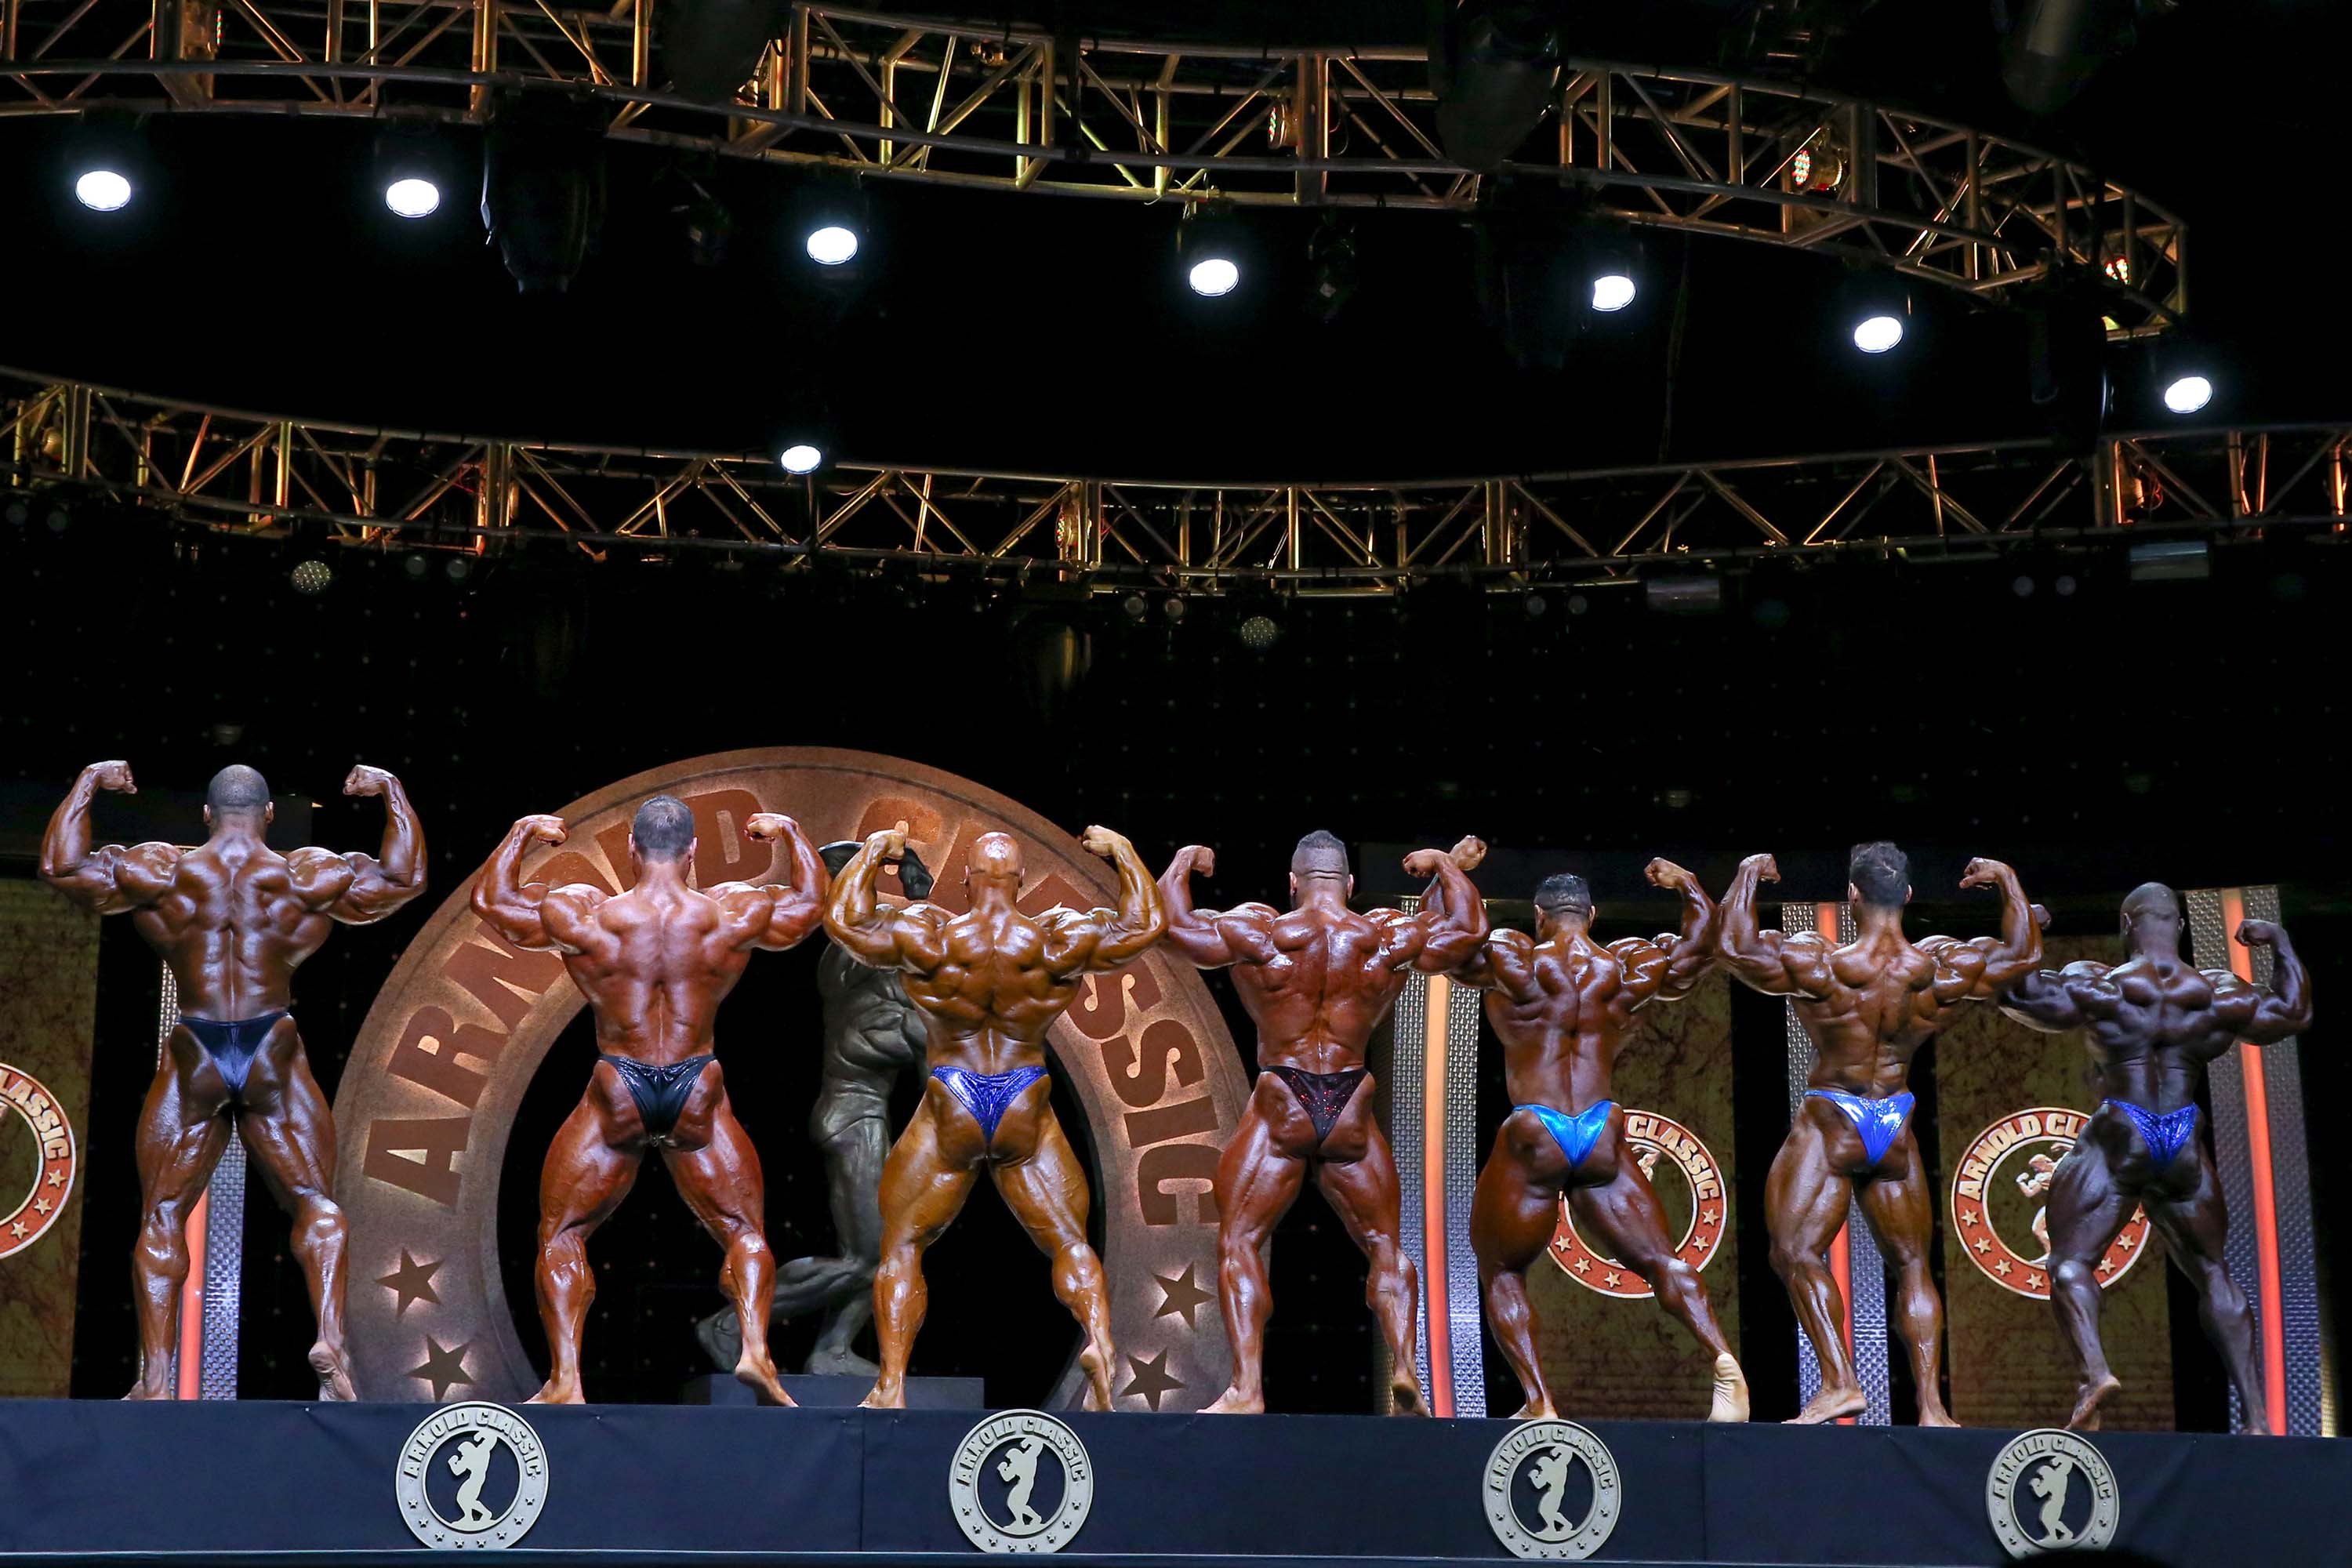 Contestants compete at the Arnold Sports Festival in March 2019, held at the Greater Columbus Convention Center in Columbus, Ohio.